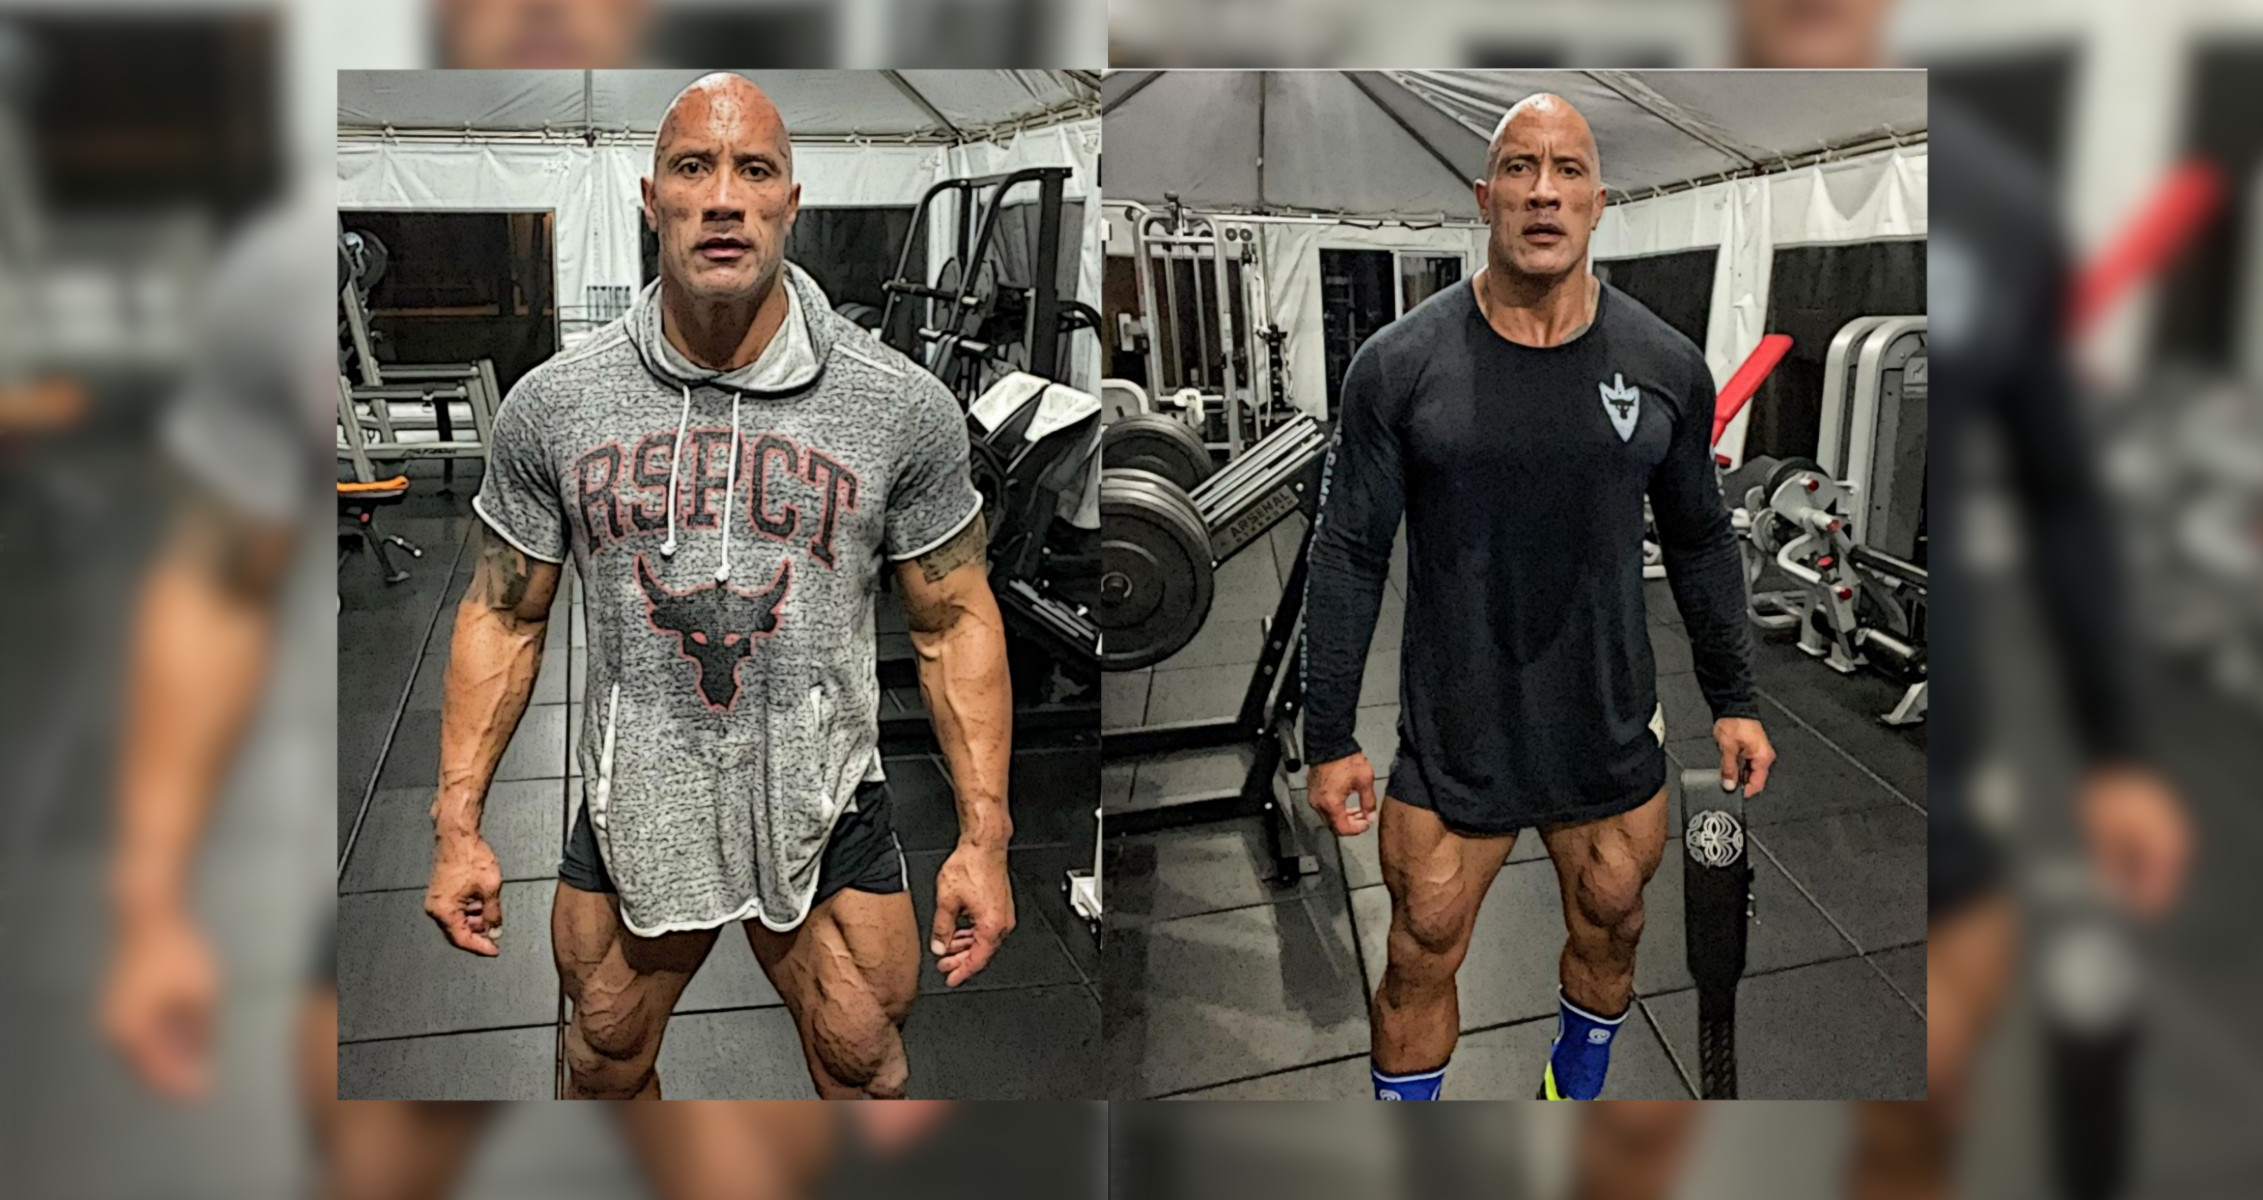 Dwayne Johnson shows off his ripped muscular thighs after gym leg